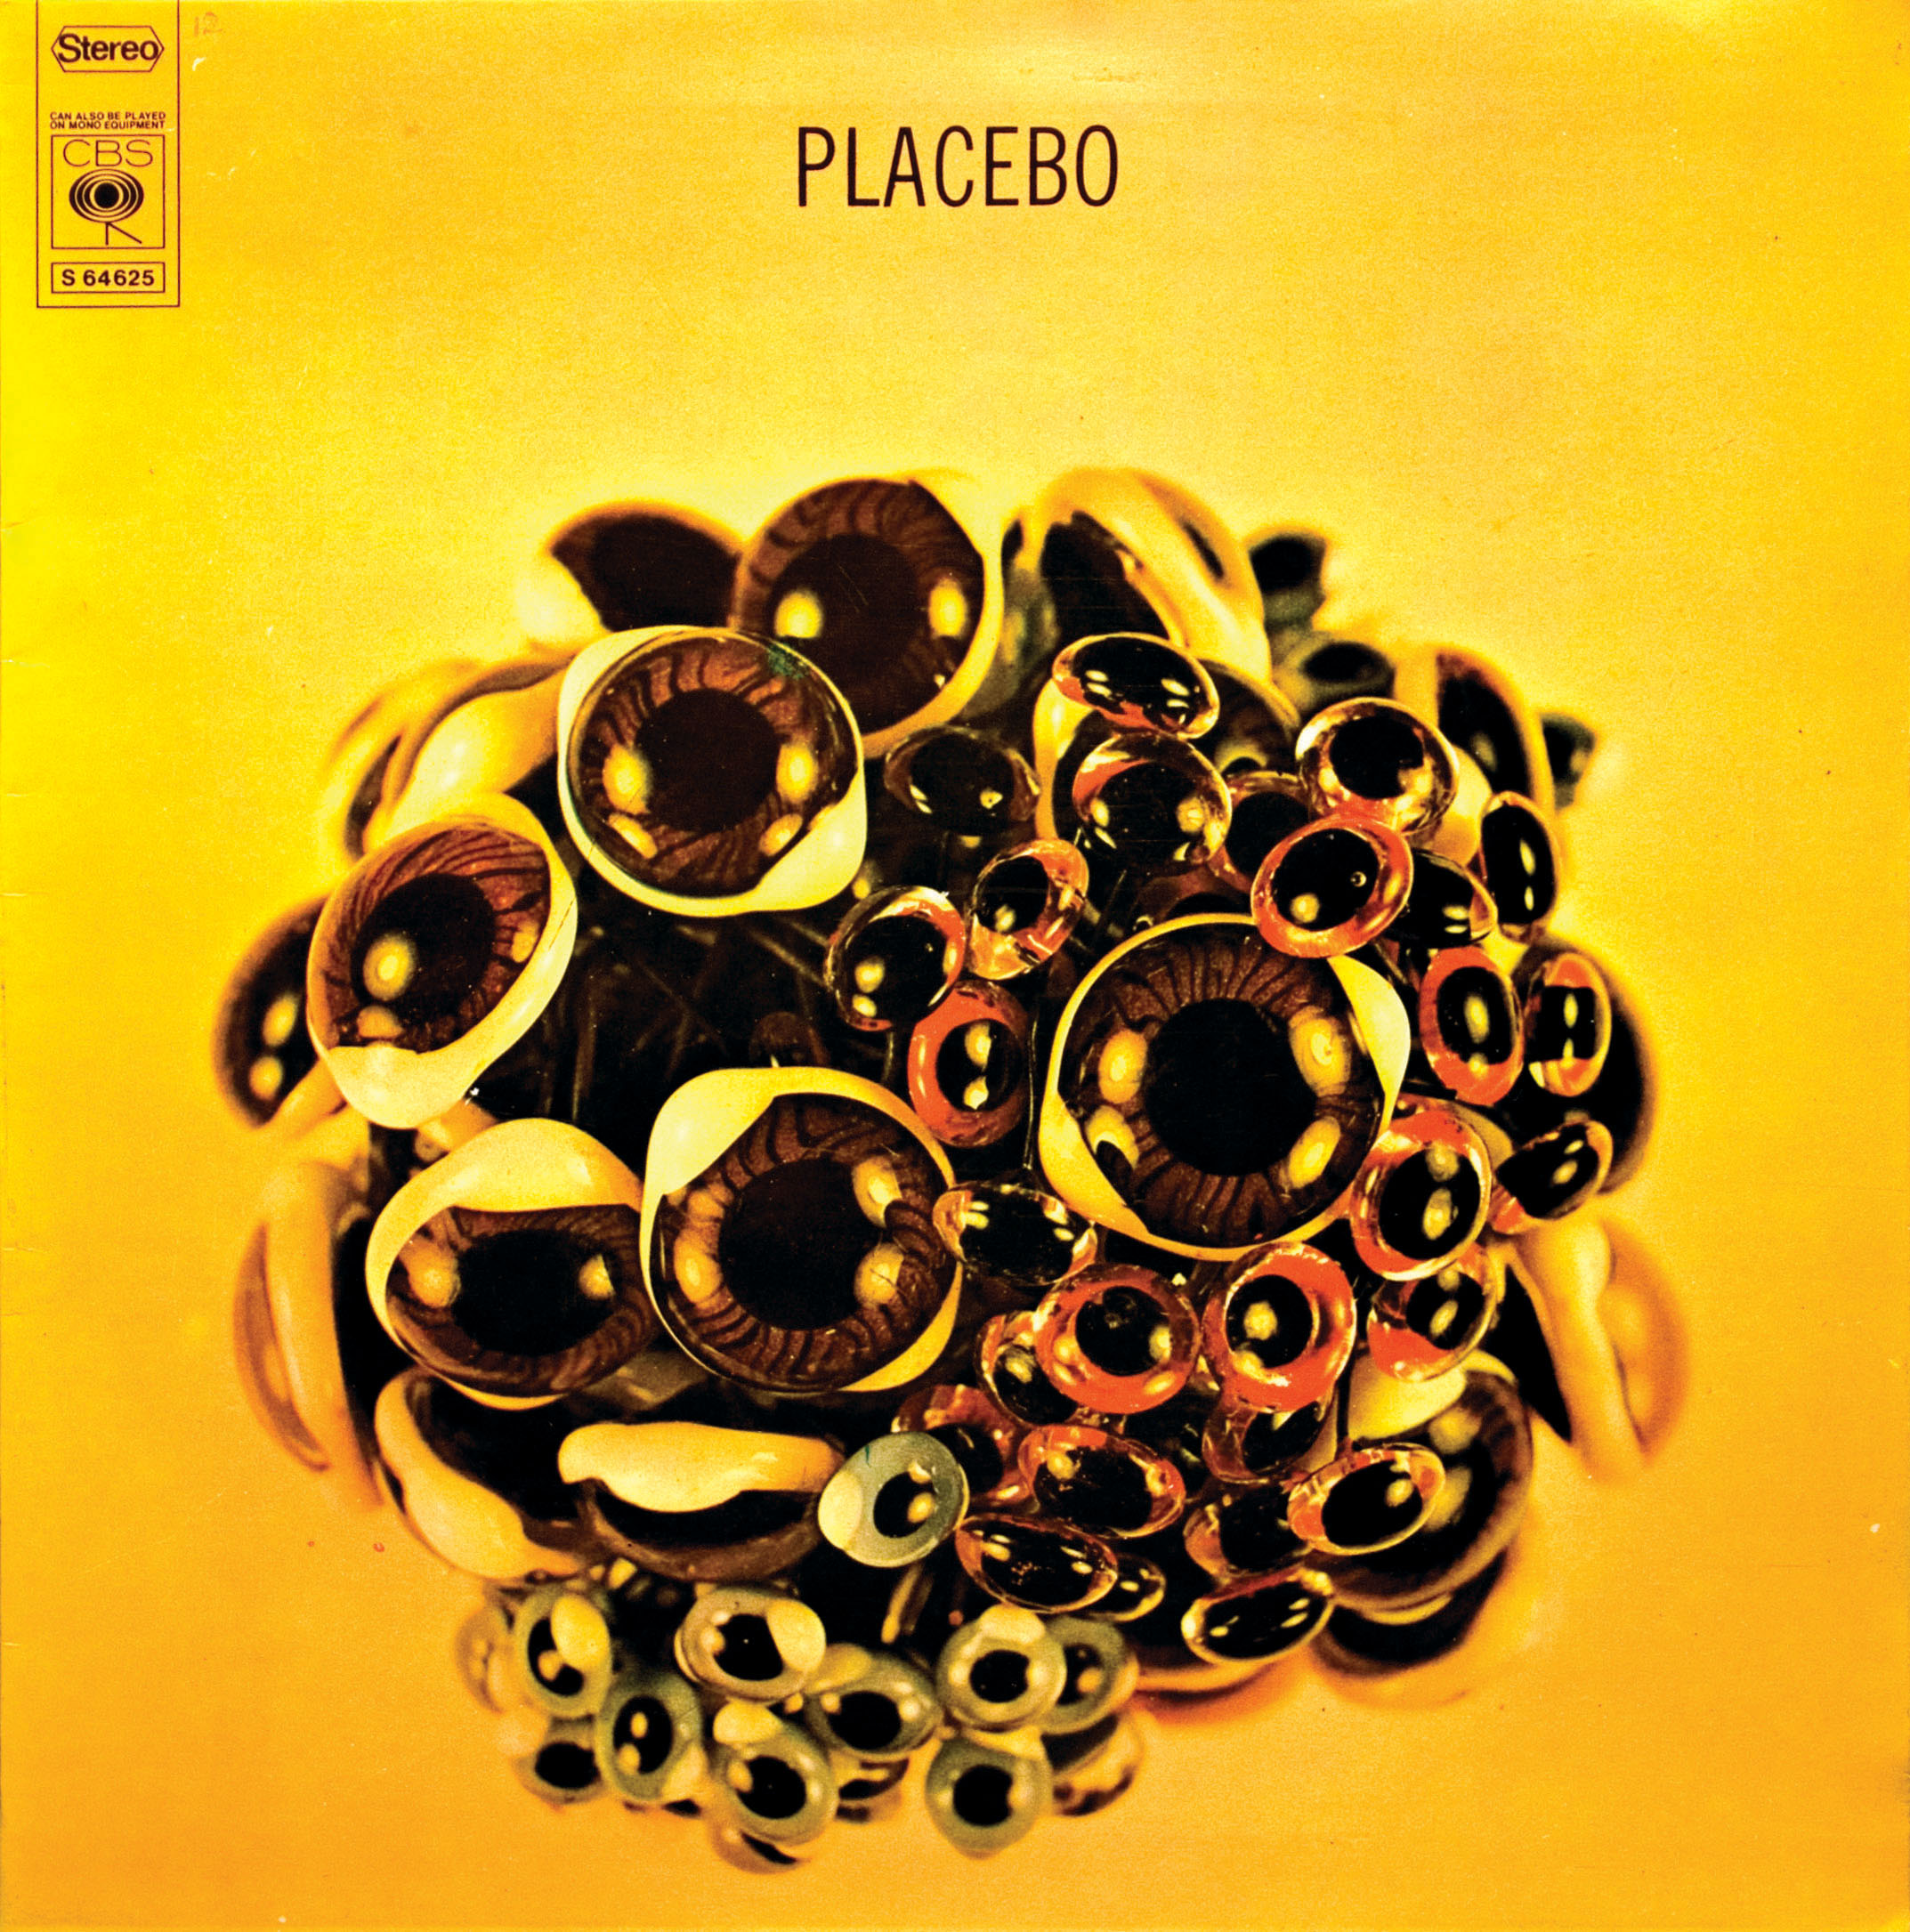 Grooves & Samples #11: Placebo – Humpty Dumpty (1971)